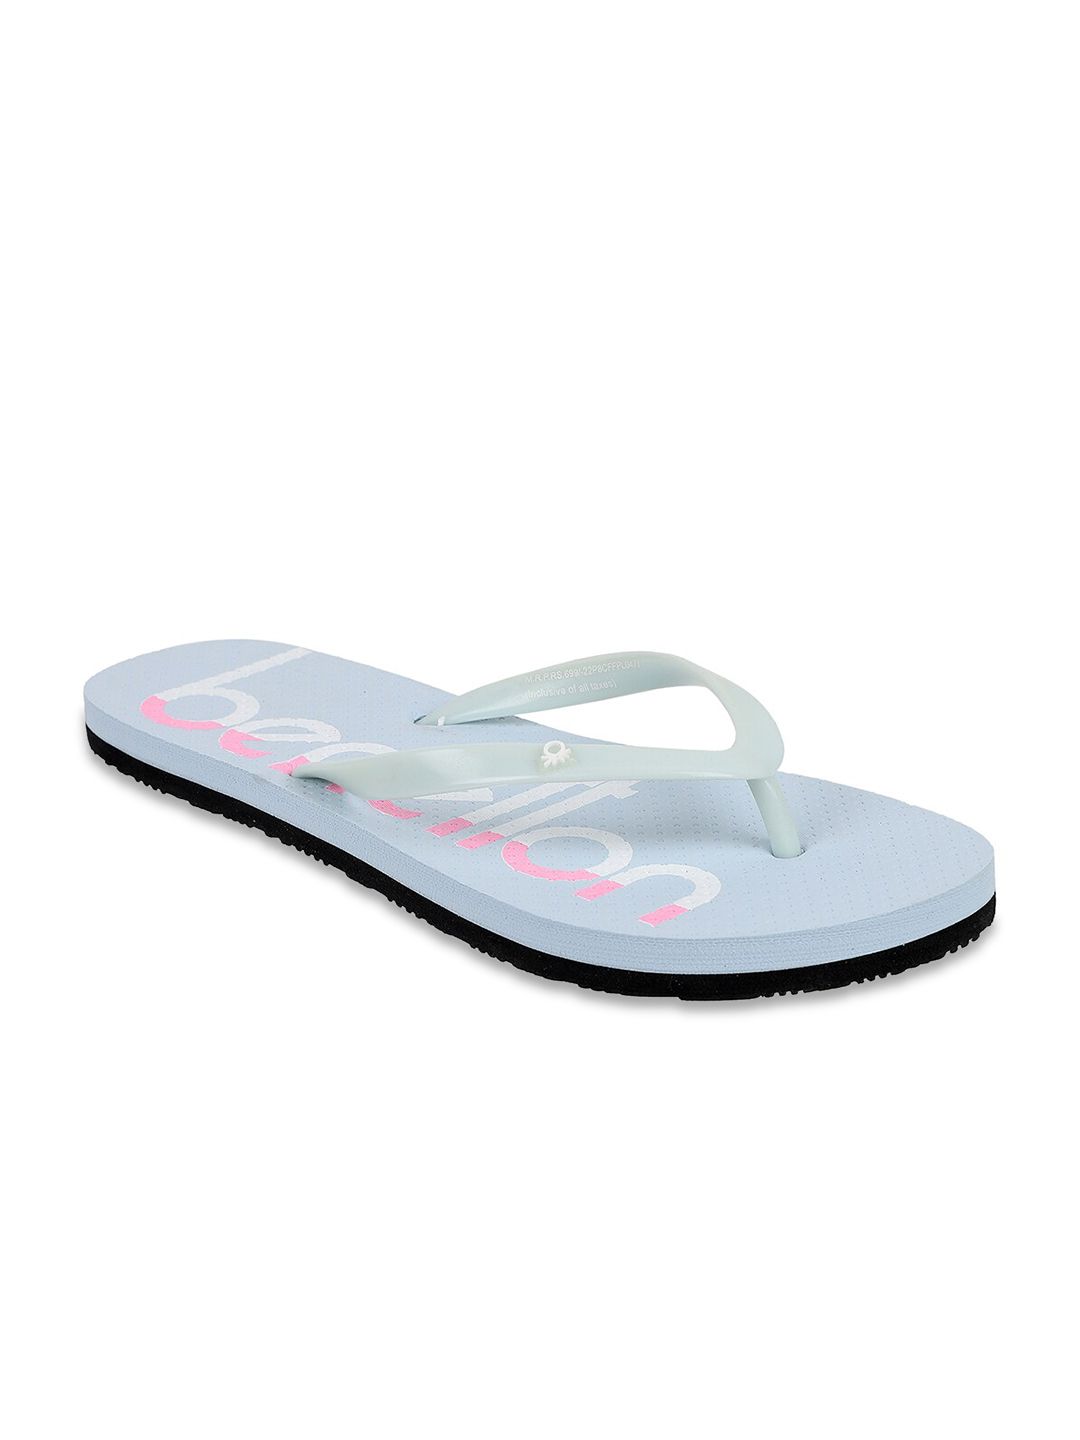 United Colors of Benetton Women Blue & White Printed Rubber Thong Flip-Flops Price in India